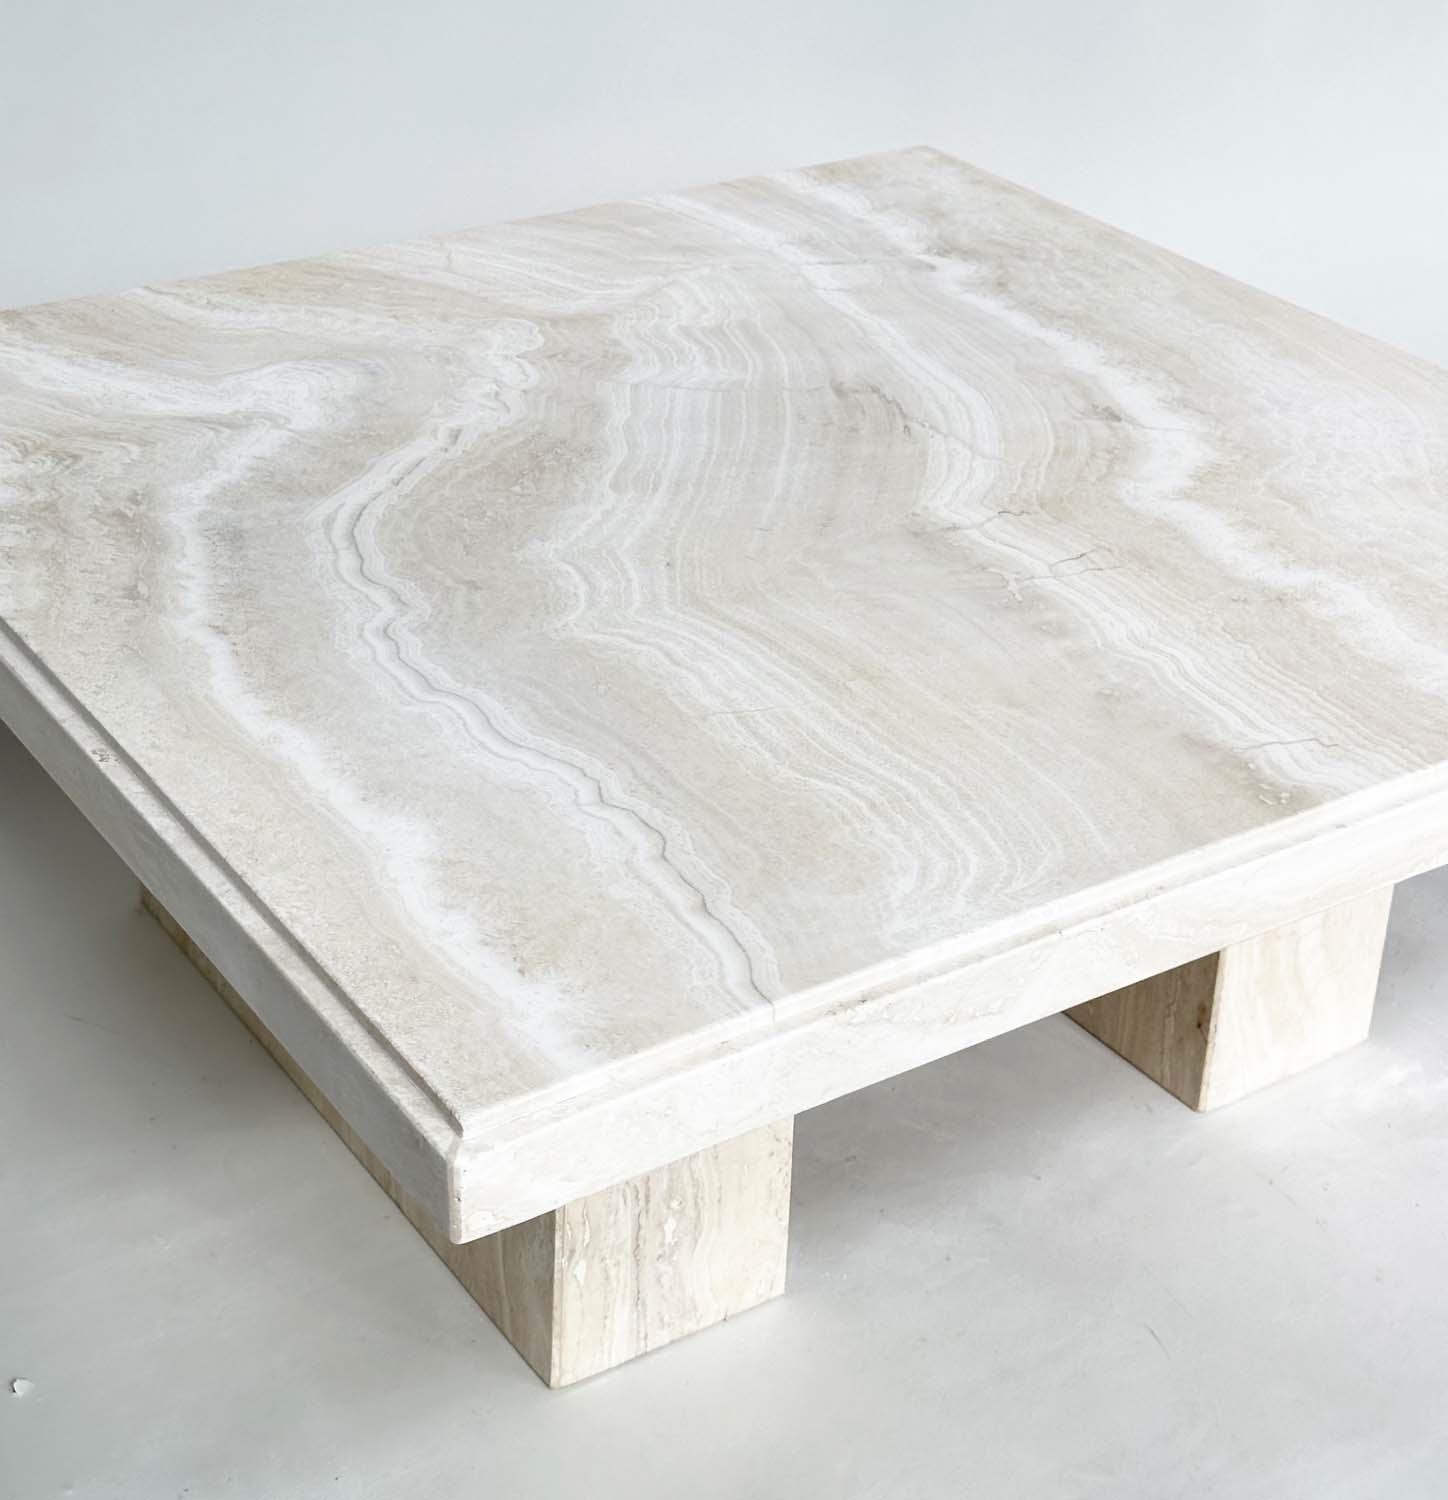 TRAVERTINE LOW TABLE, 1970's Italian travertine marble square with plinth support, 100cm x 100cm x - Image 6 of 9